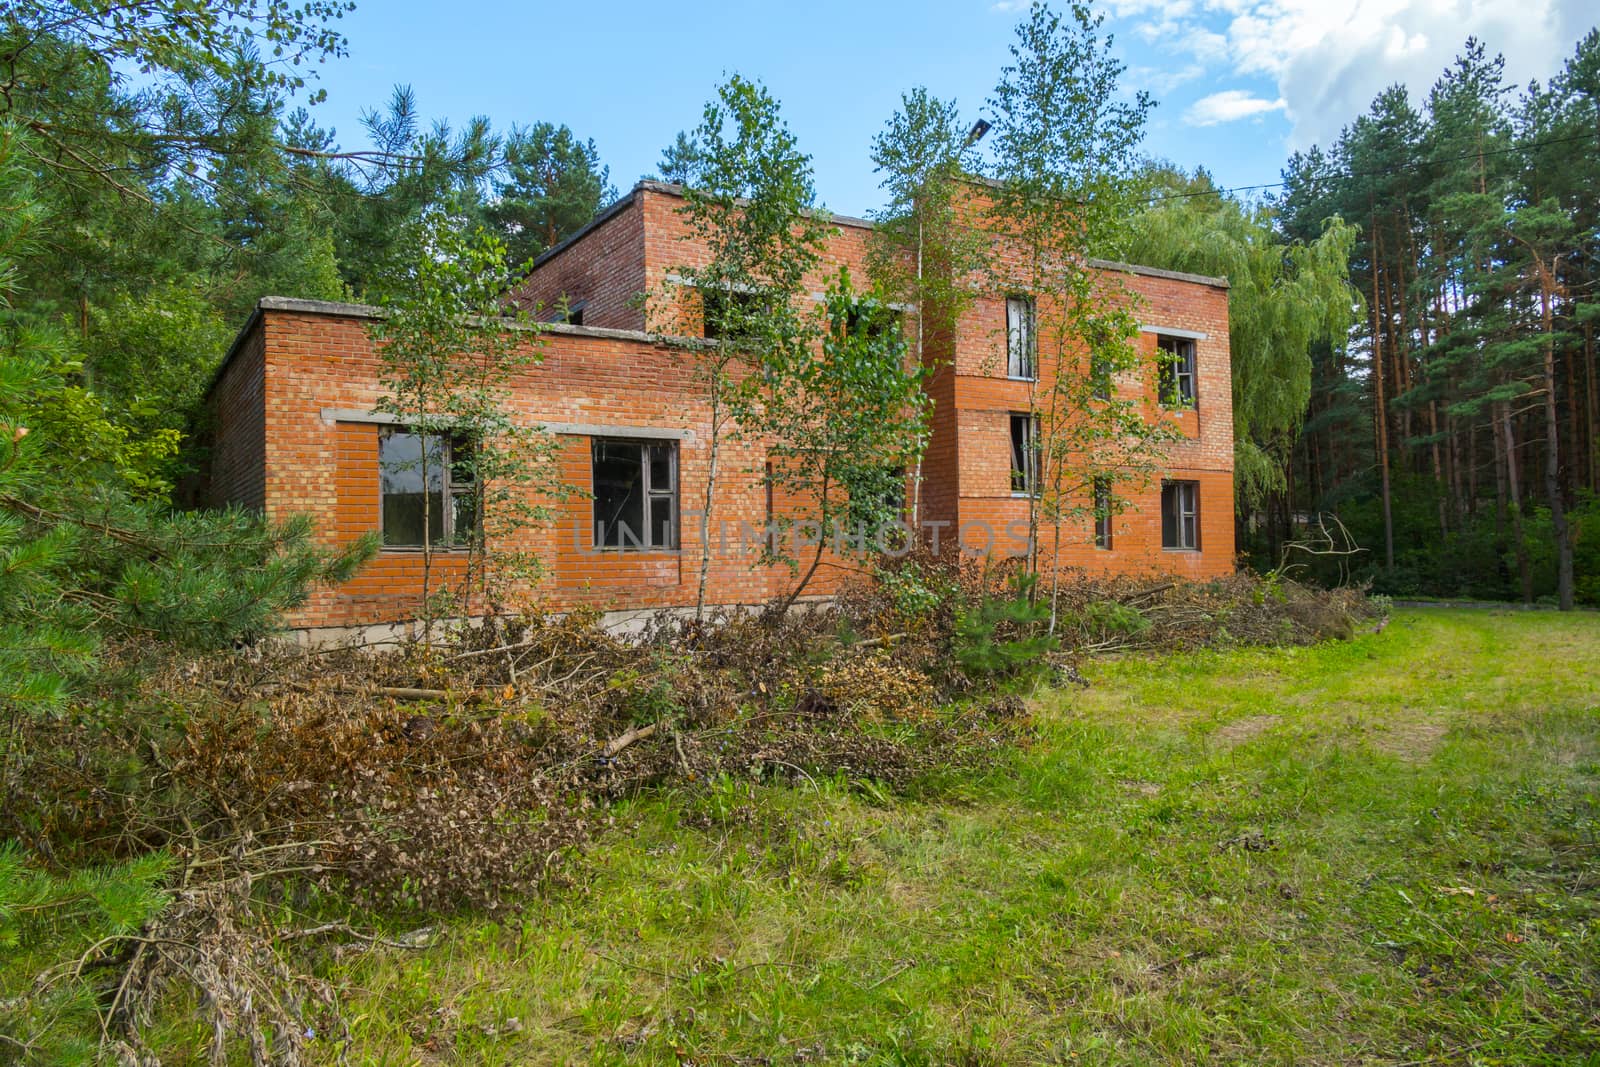 a brick abandoned building in the middle of a forest glade surrounded by dense forest